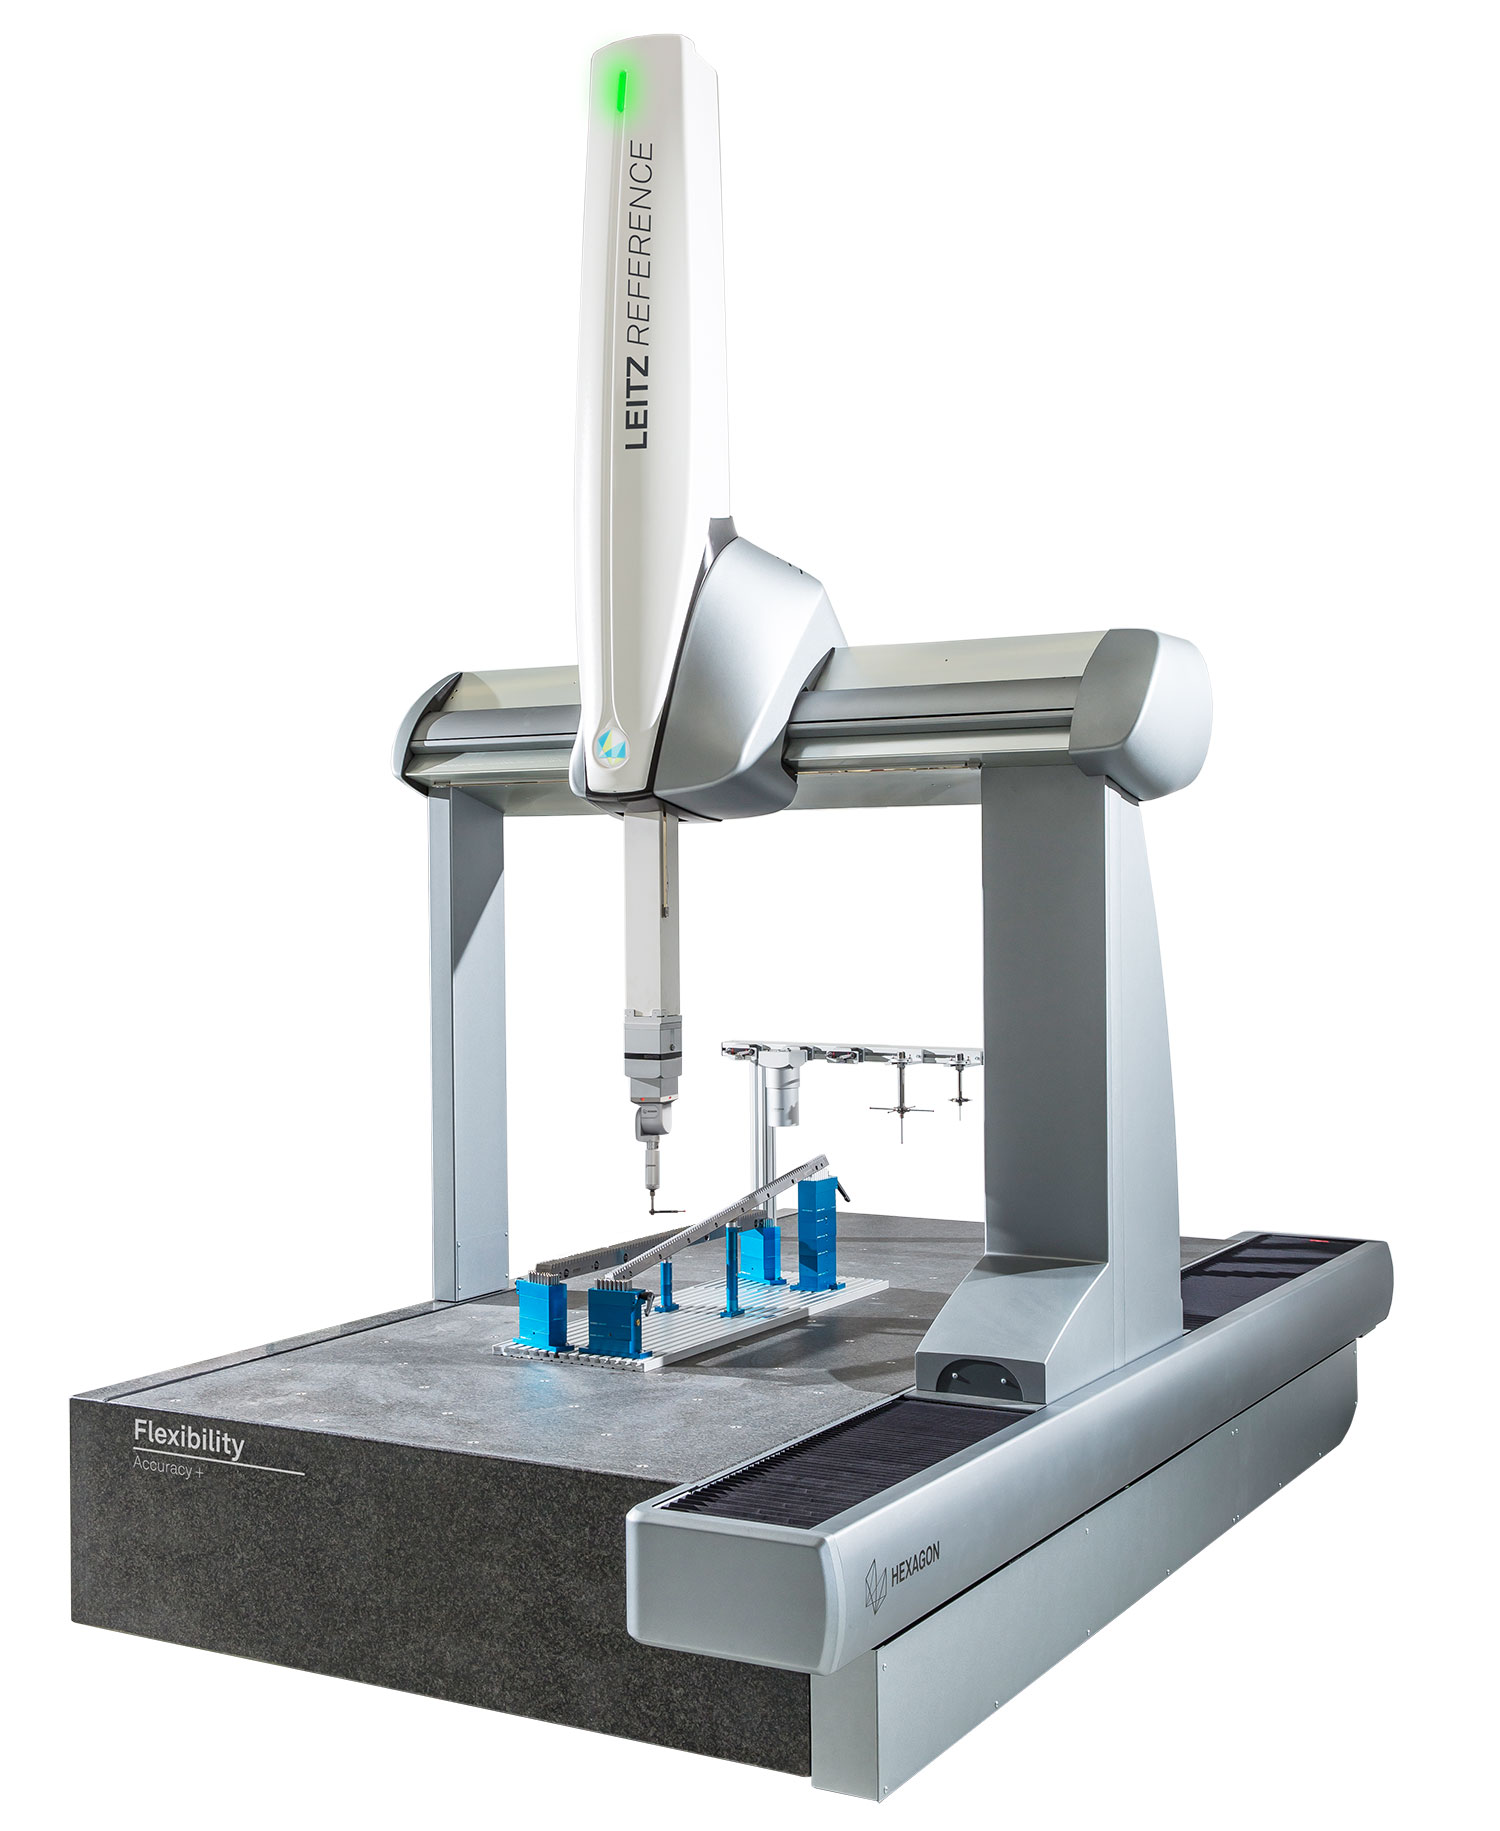 Ultra-high accuracy CMM optimised for application flexibility and short measuring times 